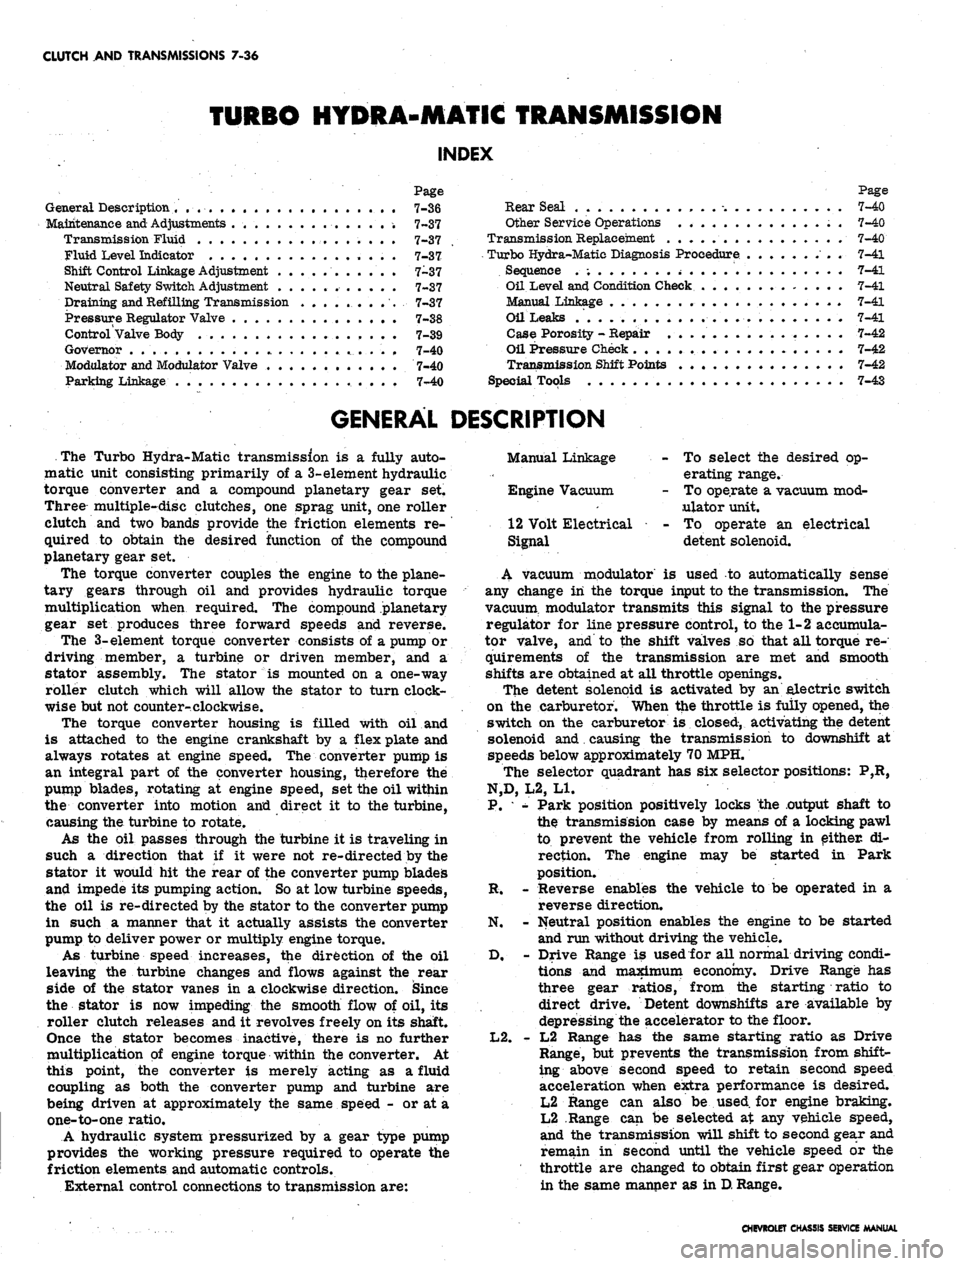 CHEVROLET CAMARO 1967 1.G Chassis Workshop Manual 
CLUTCH AND TRANSMISSIONS 7-36

TURBO HYDRA-MATIC TRANSMISSION

INDEX

Page

General Description . . , . 7-36

Maintenance and Adjustments . 7-37

Transmission Fluid 7-37

Fluid Level Indicator 7-37

